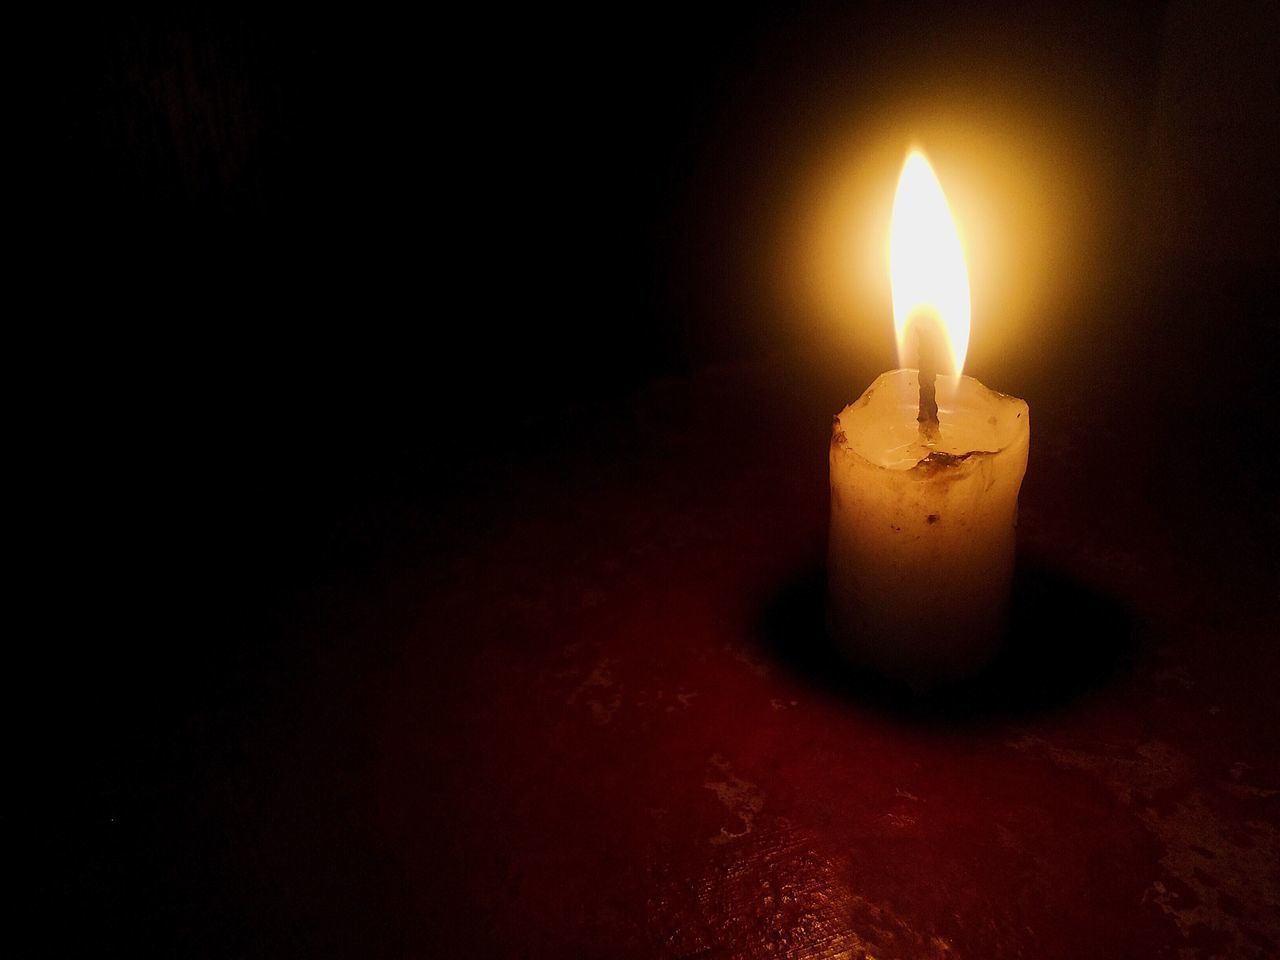 CLOSE-UP OF LIT CANDLE OVER BLACK BACKGROUND